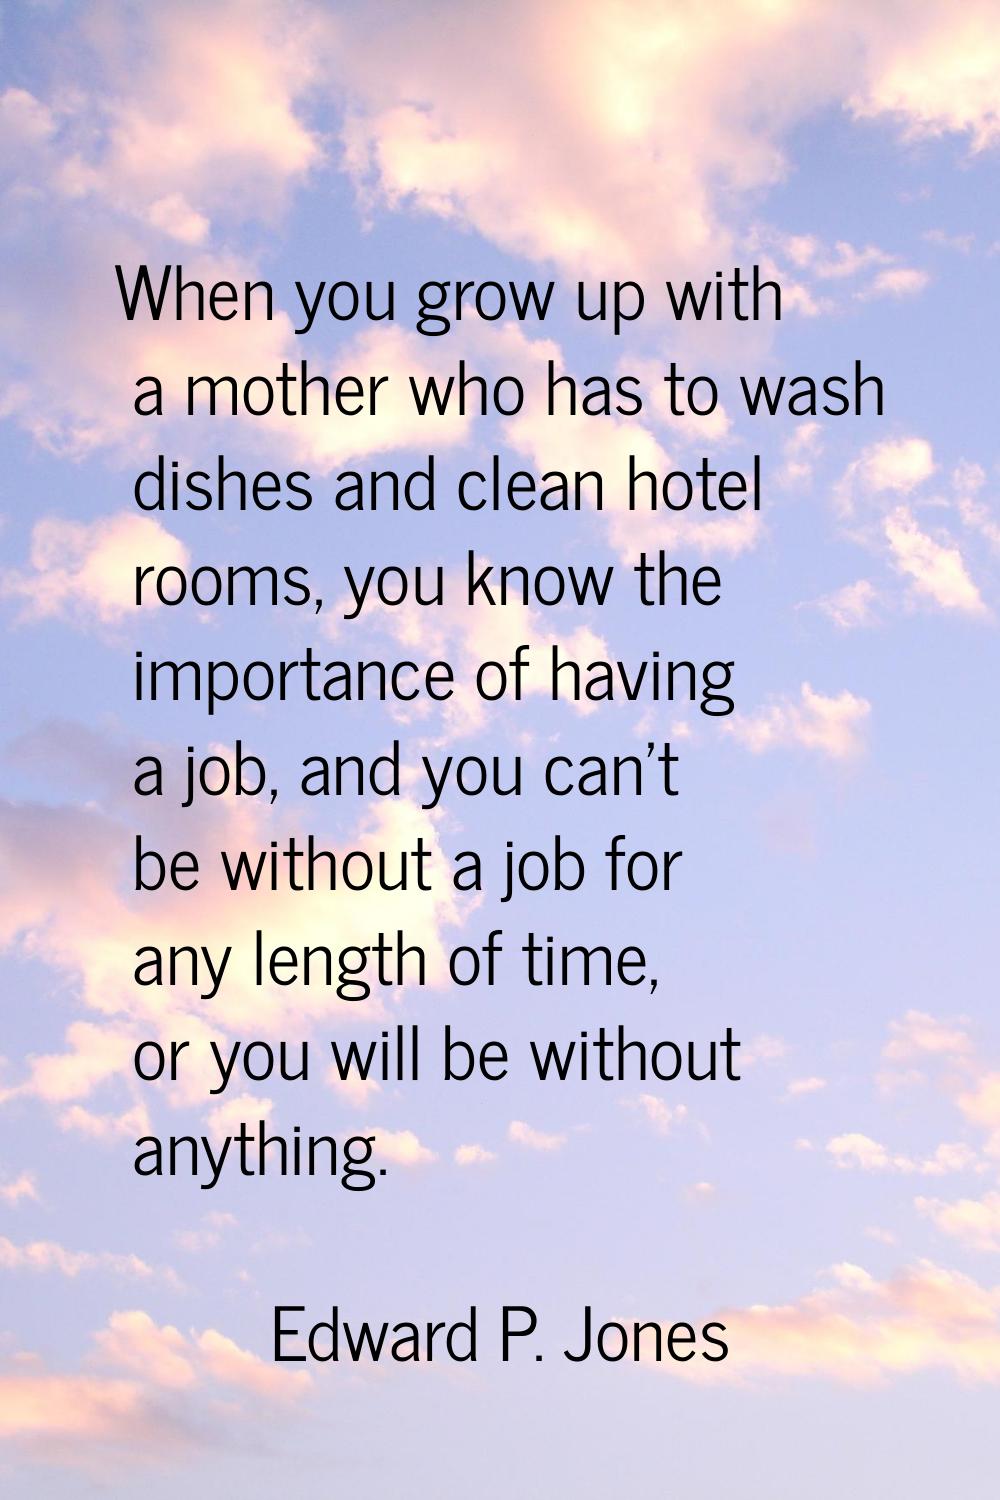 When you grow up with a mother who has to wash dishes and clean hotel rooms, you know the importanc